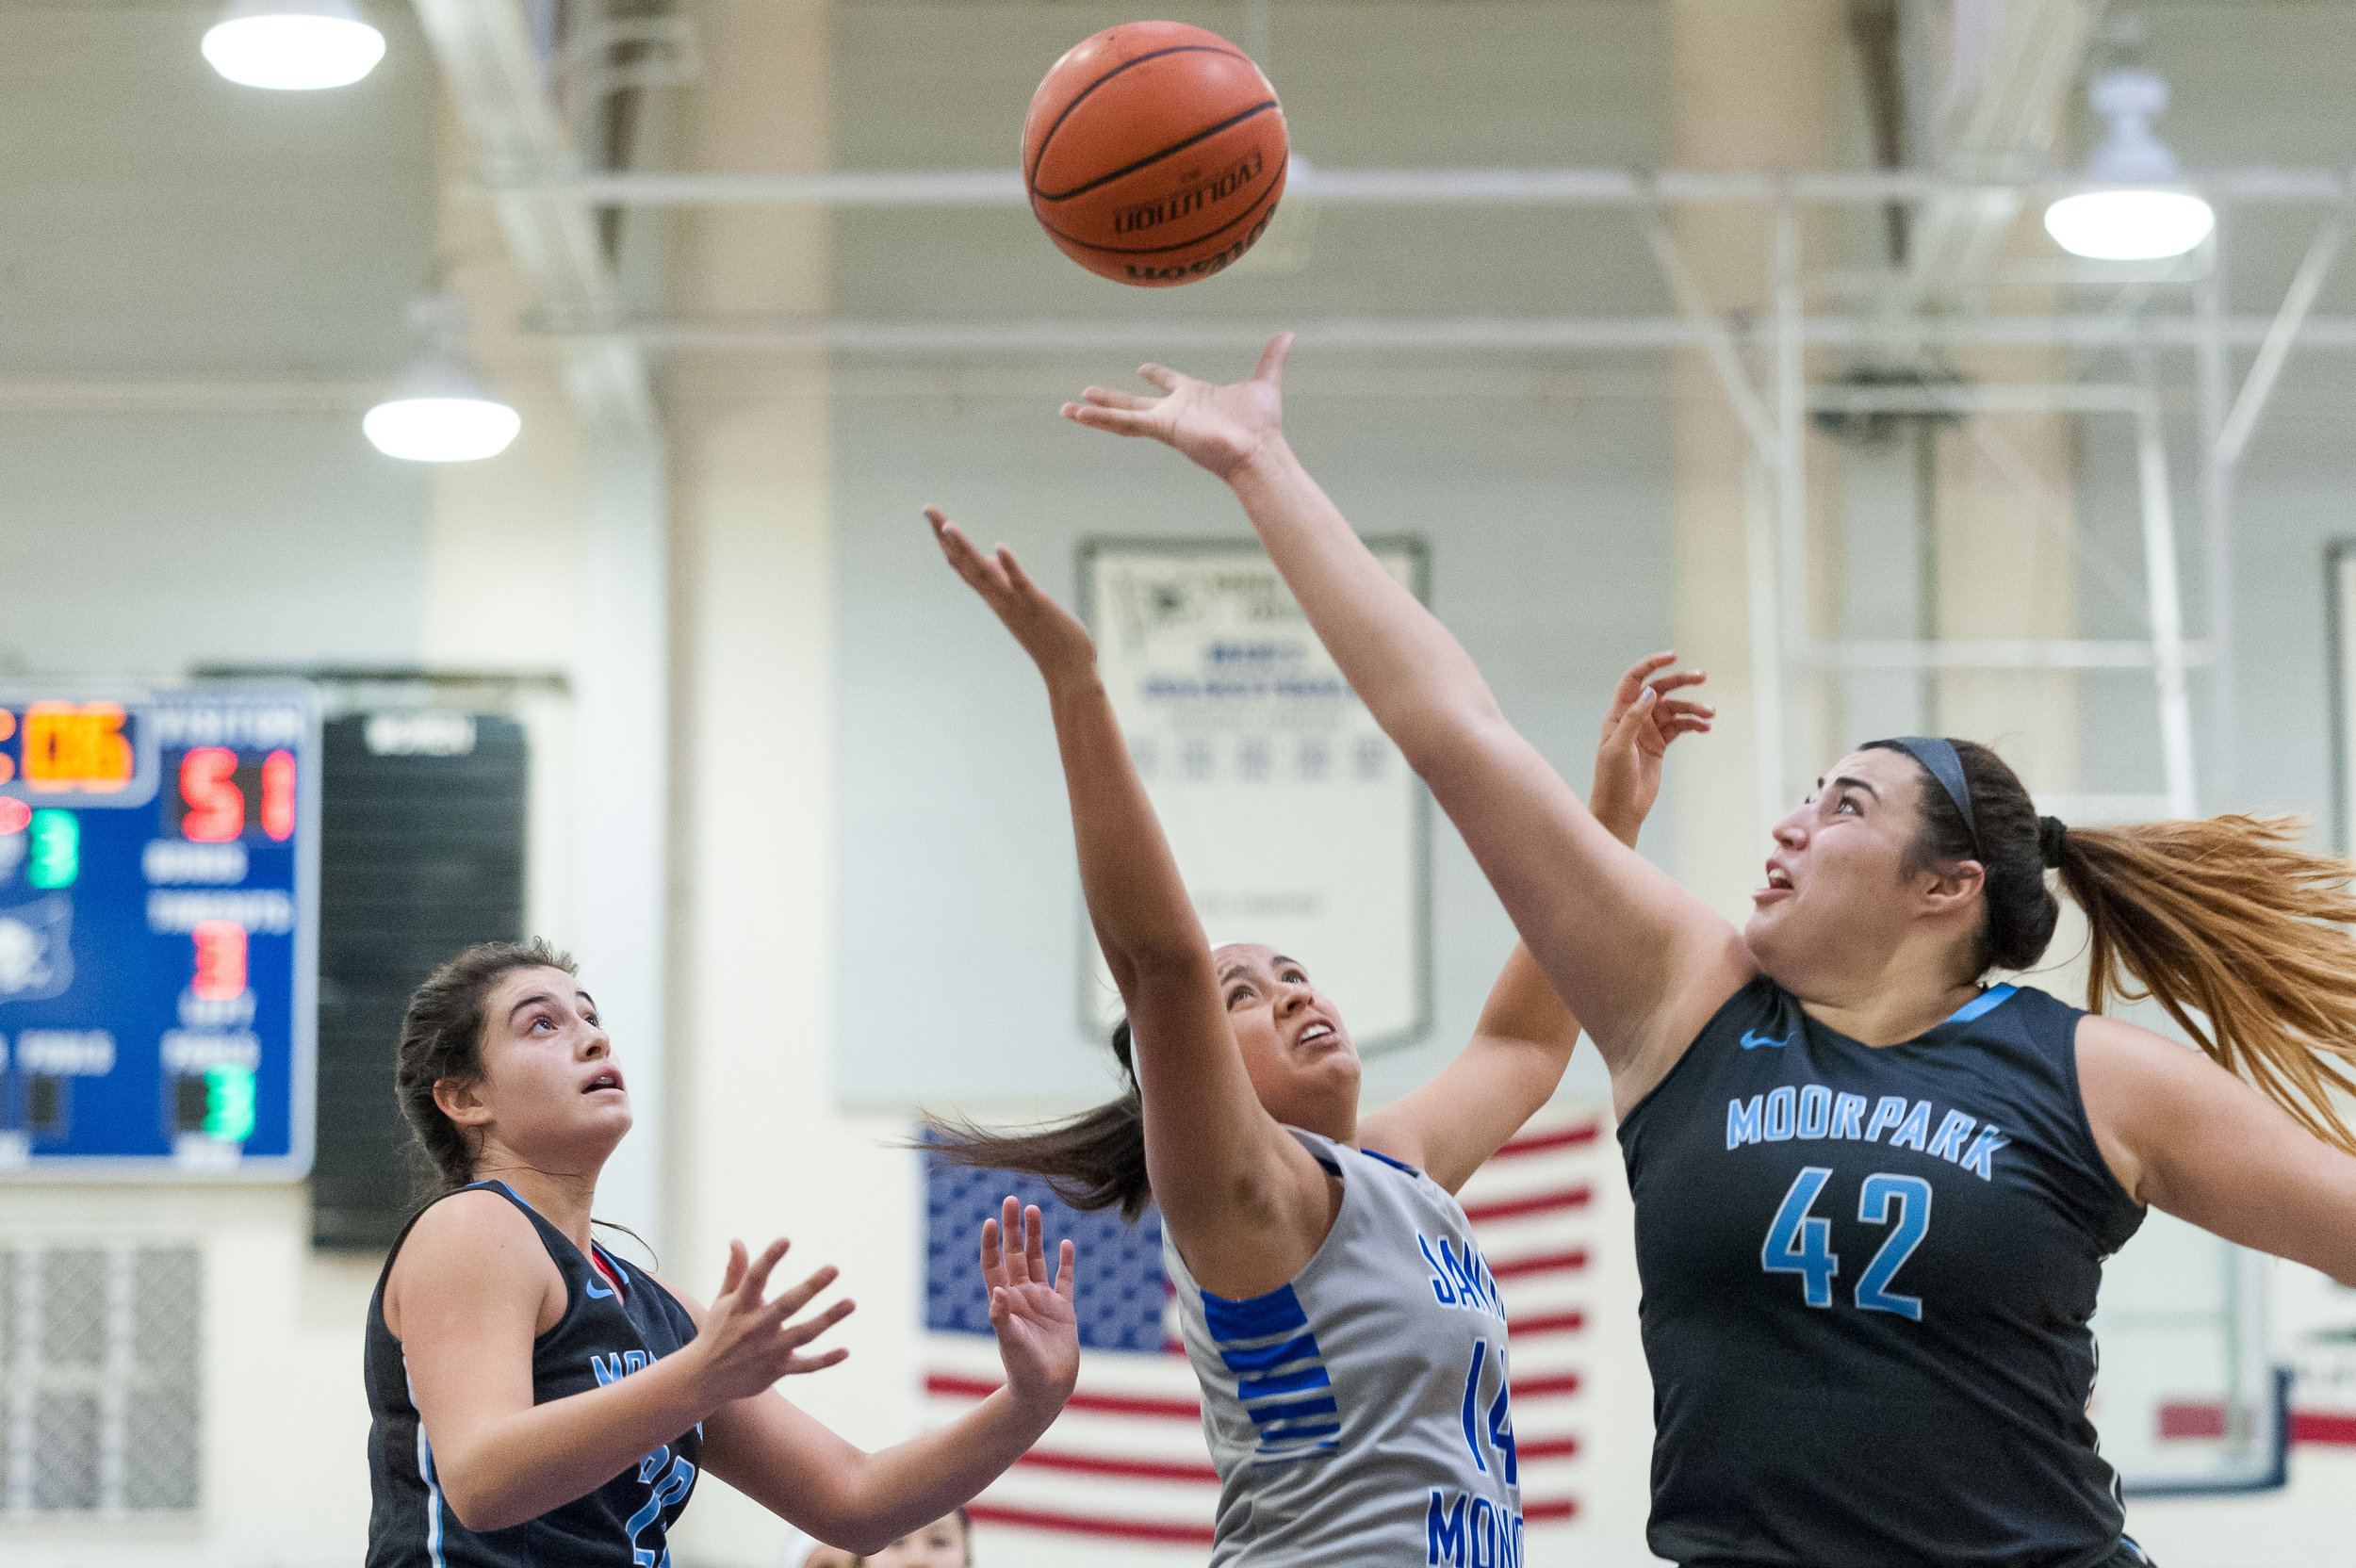  Forward Angelina Moreno (14,Center) of Santa Monica College makes a shot attempt but is blocked by center Barbara Rangel (42,Right) of Moorpark College. The Santa Monica College Corsairs lose the game 52-69 to the Moorpark College Raiders. The game 